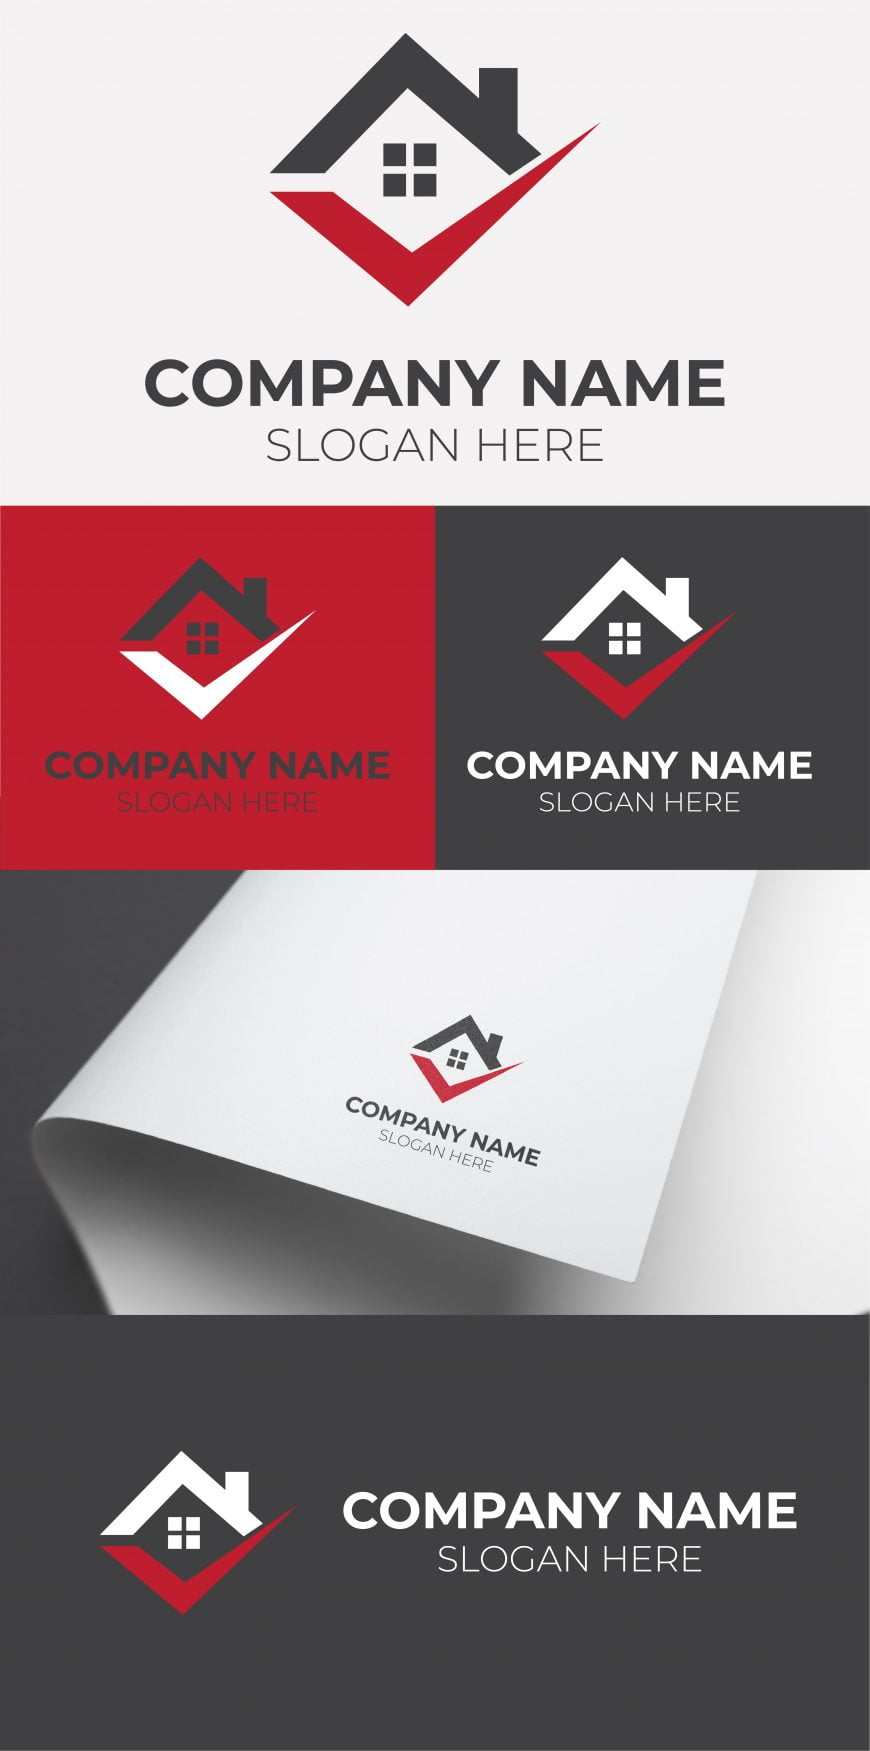 REAL-ESTATE-LOGO-FREE-TEMPLATE-scaled